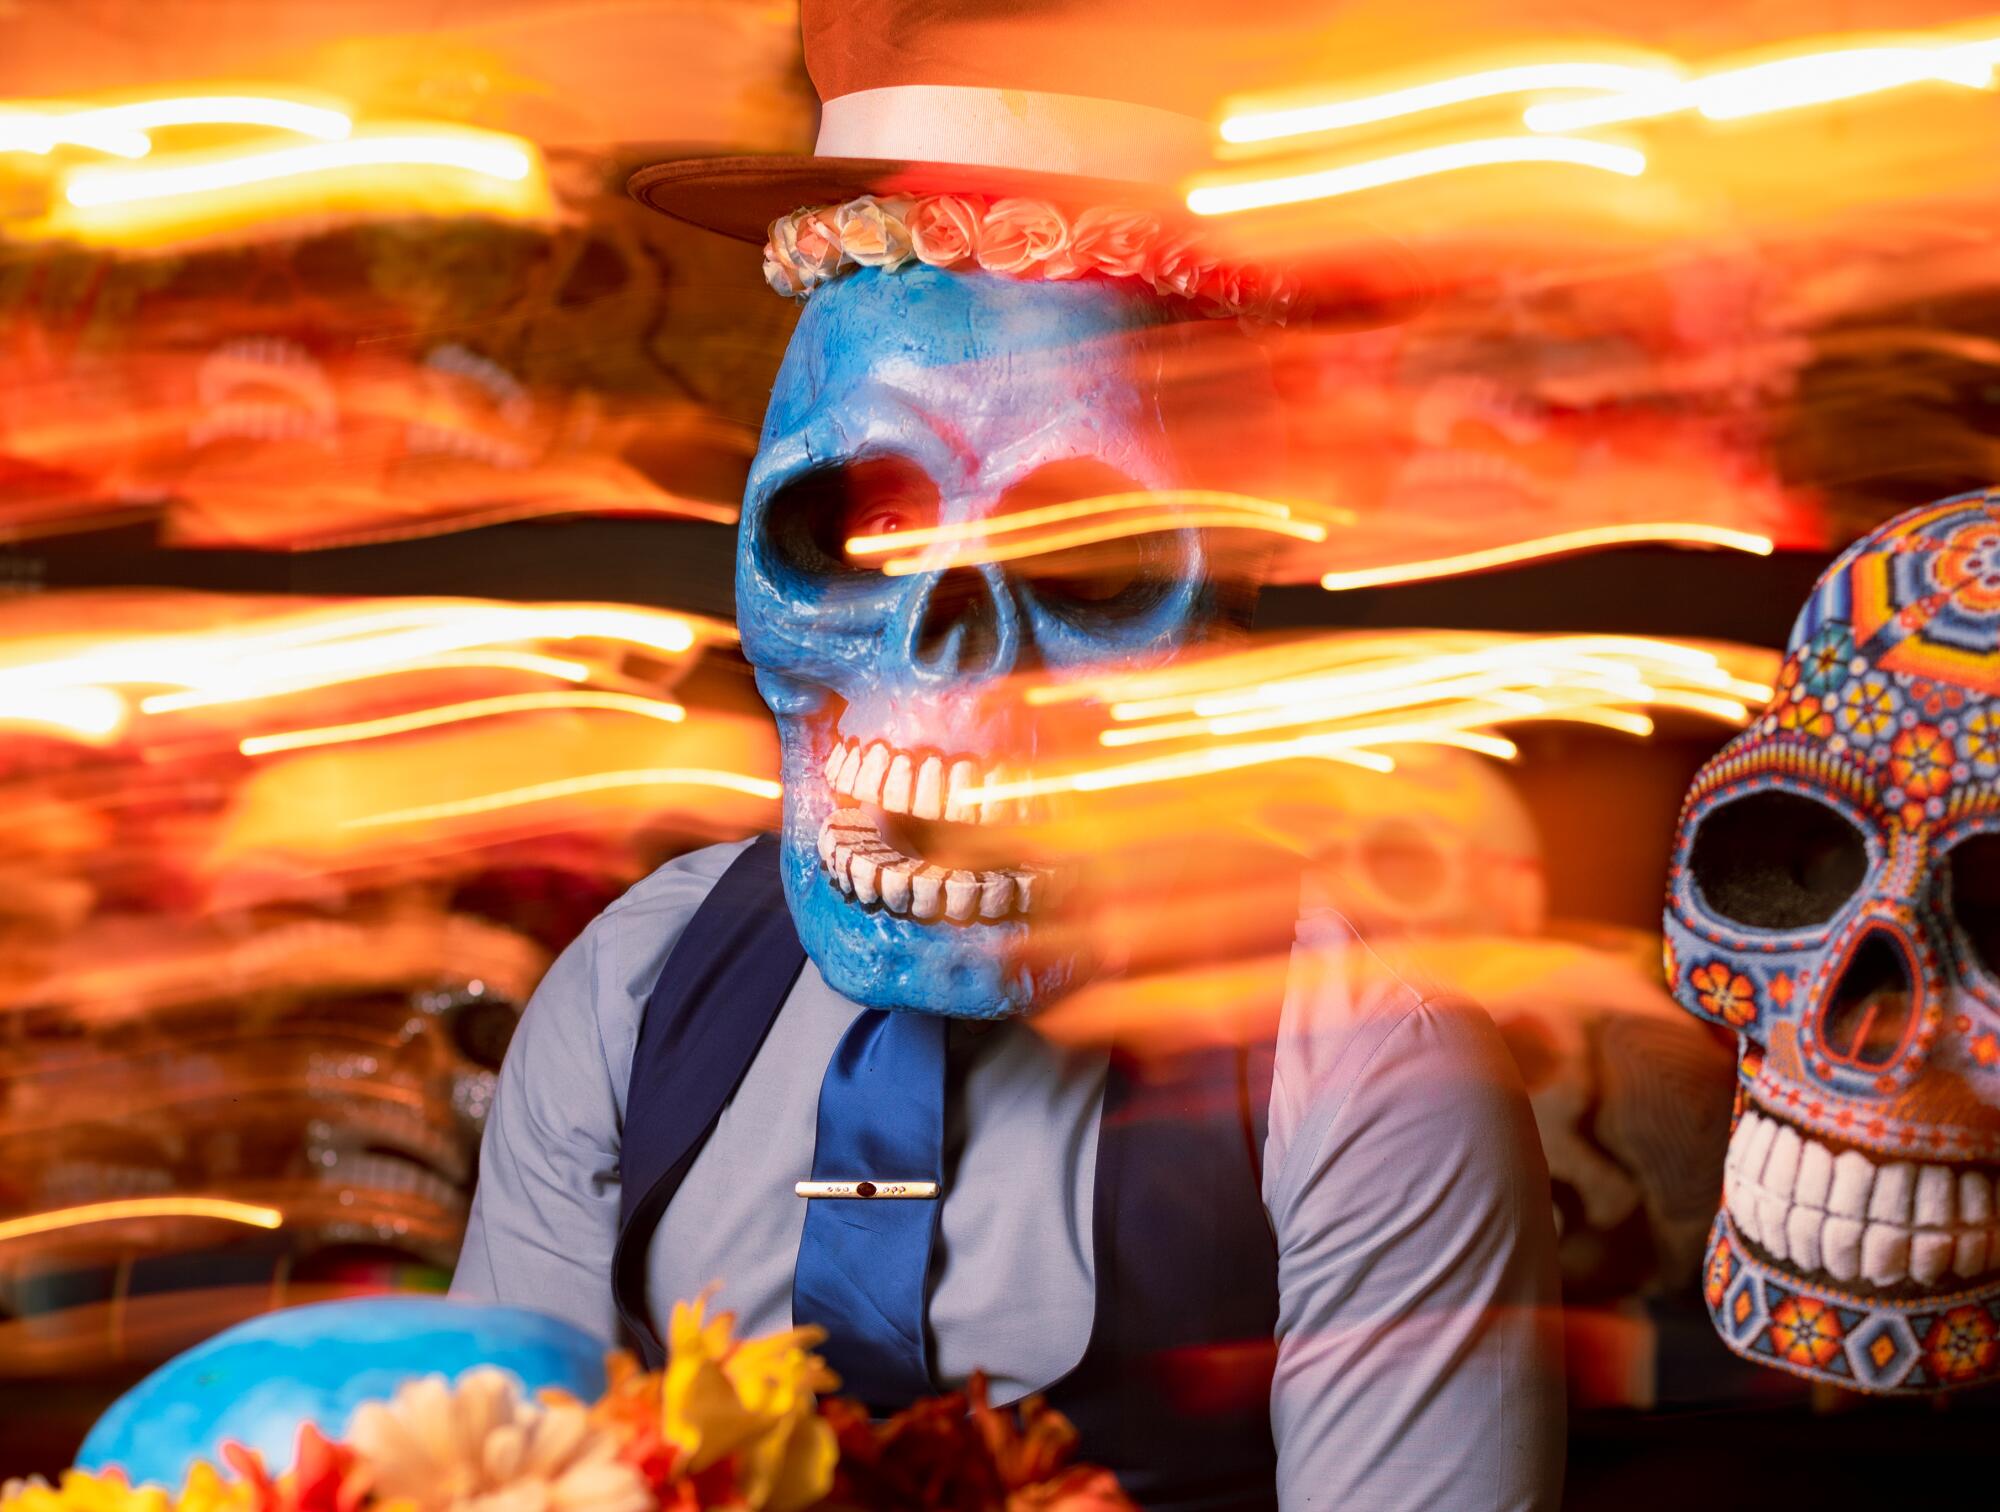 Butch Locsin wearing a blue skull mask, with glowing orange lights streaked around him.